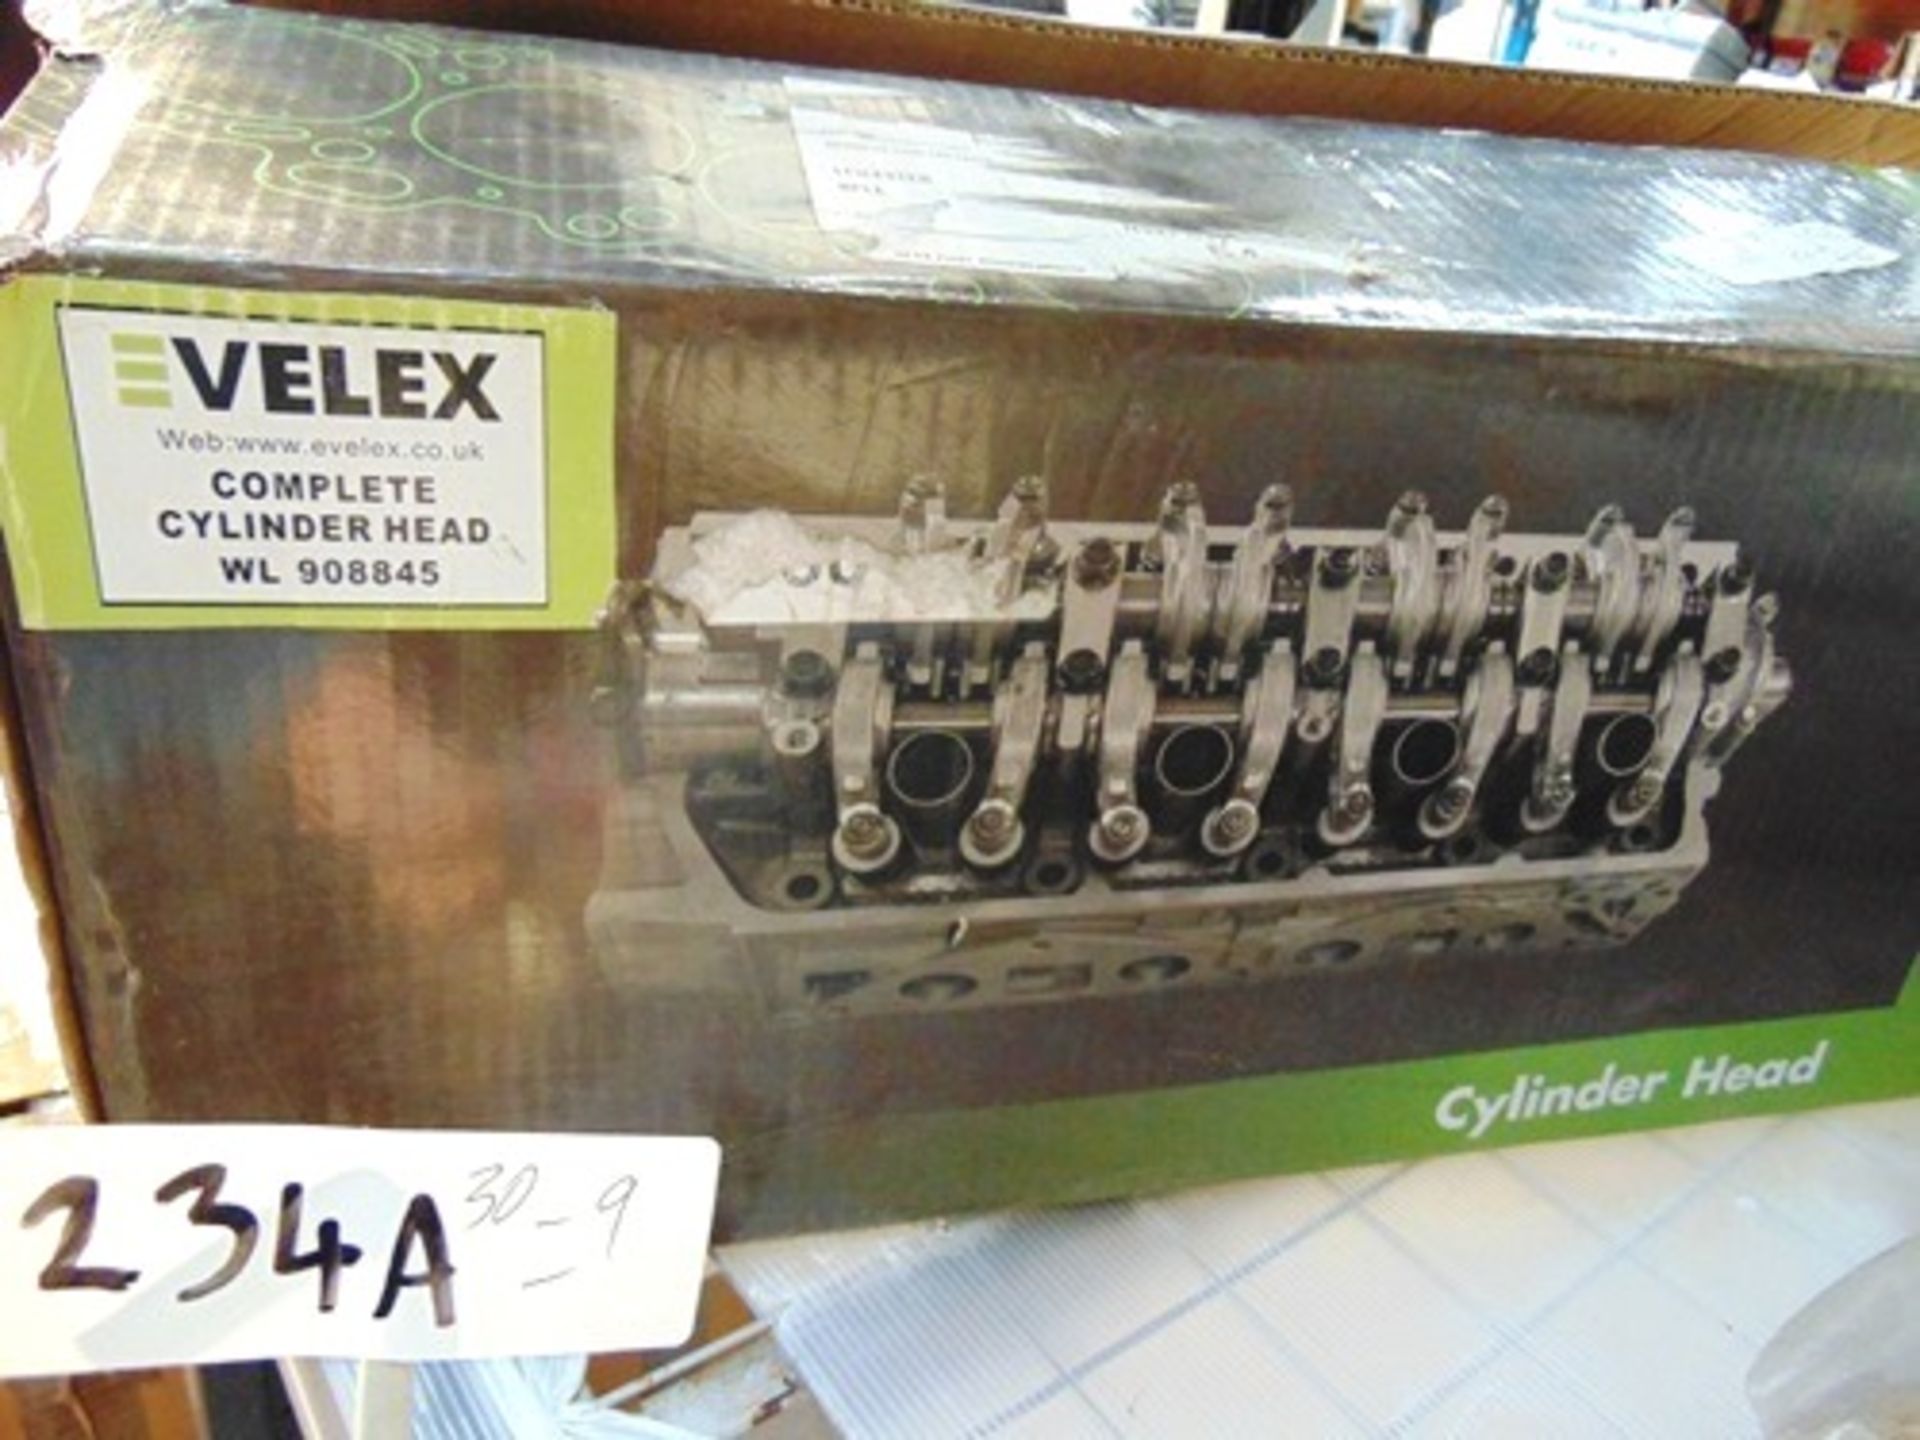 Velex complete cylinder head, P.N. WL908845, believed to be for a Ford Transit 2.4DCi 2006 (GS5)